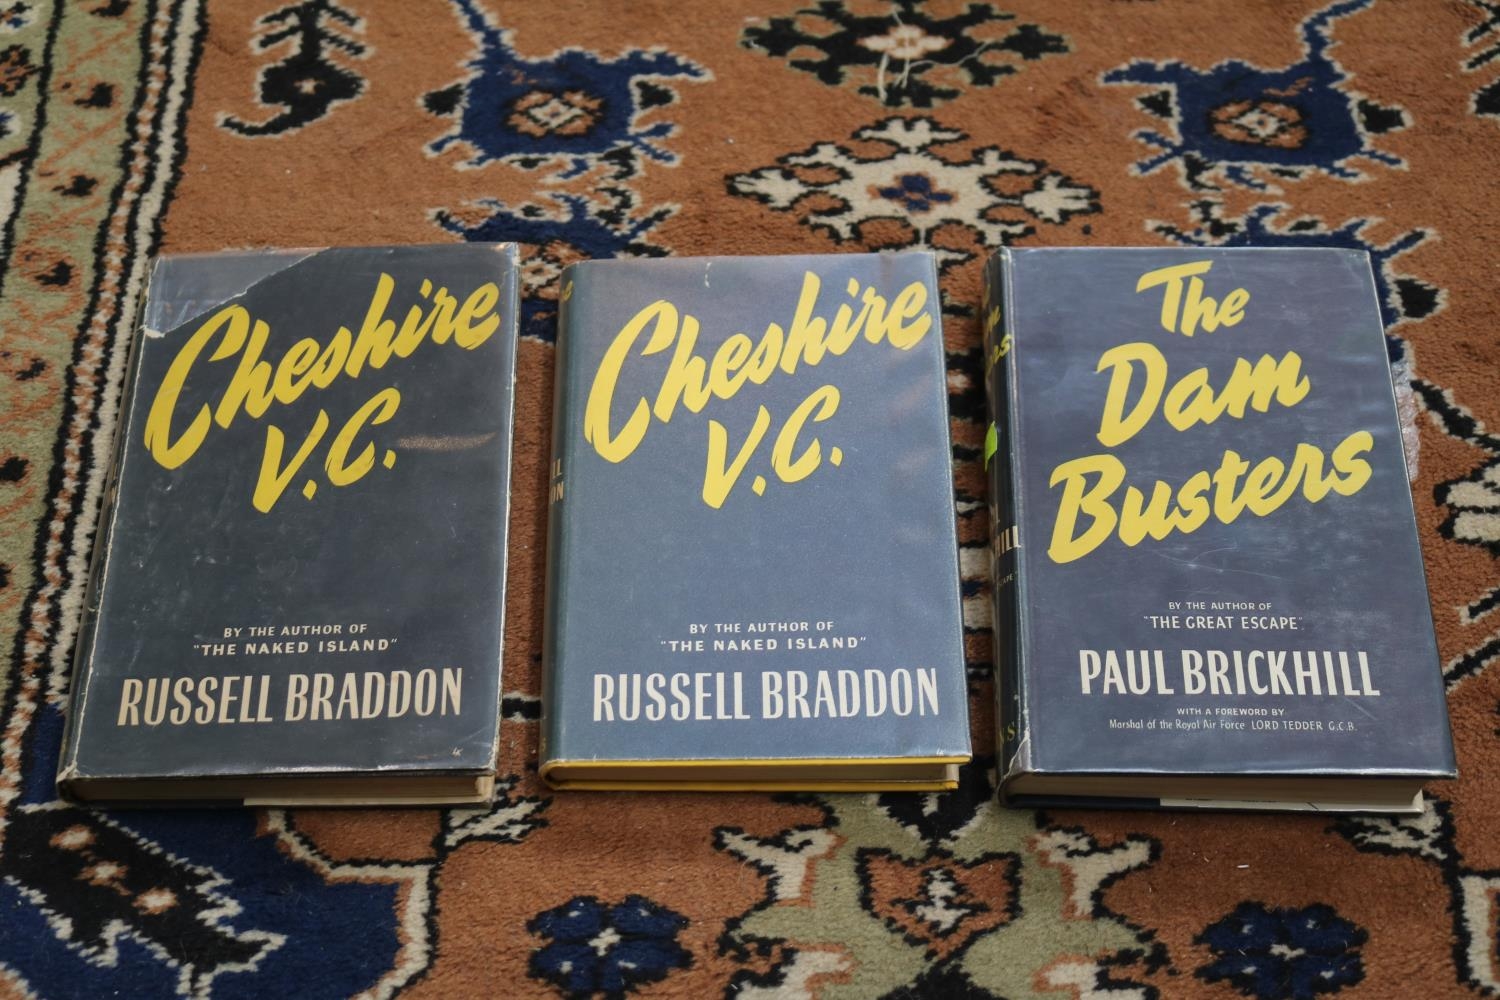 Set of 3 books The Dambusters, Cheshire V.C by Paul Brickhill & Russell Braddon